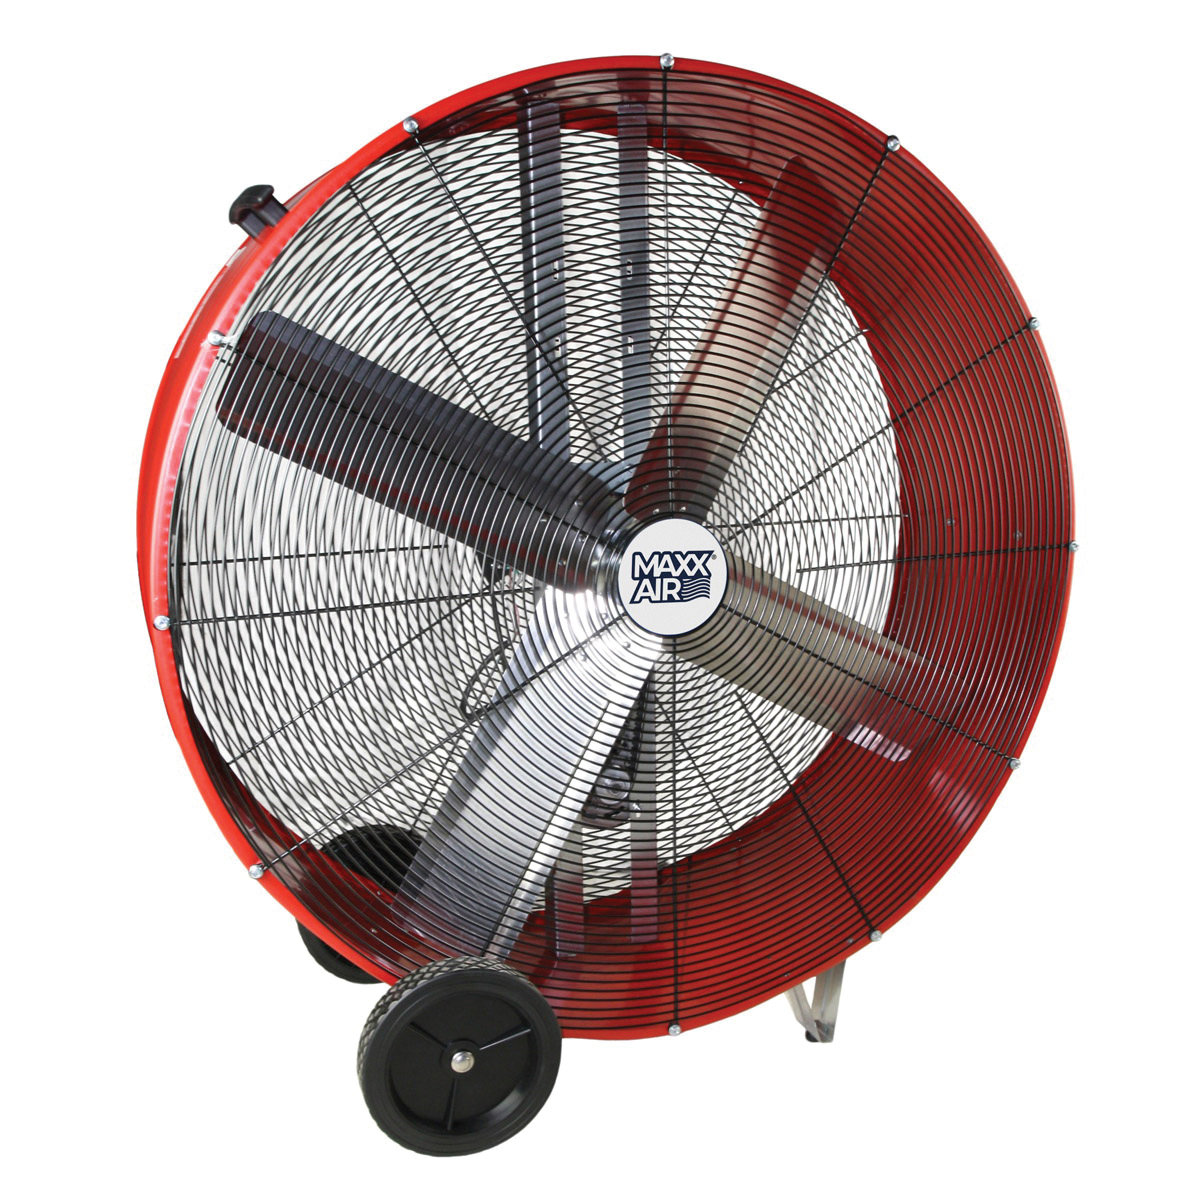 BF42BD Portable Barrel Fan, 120 V, 2-Speed, 5800 to 10,000 cfm Air, Red